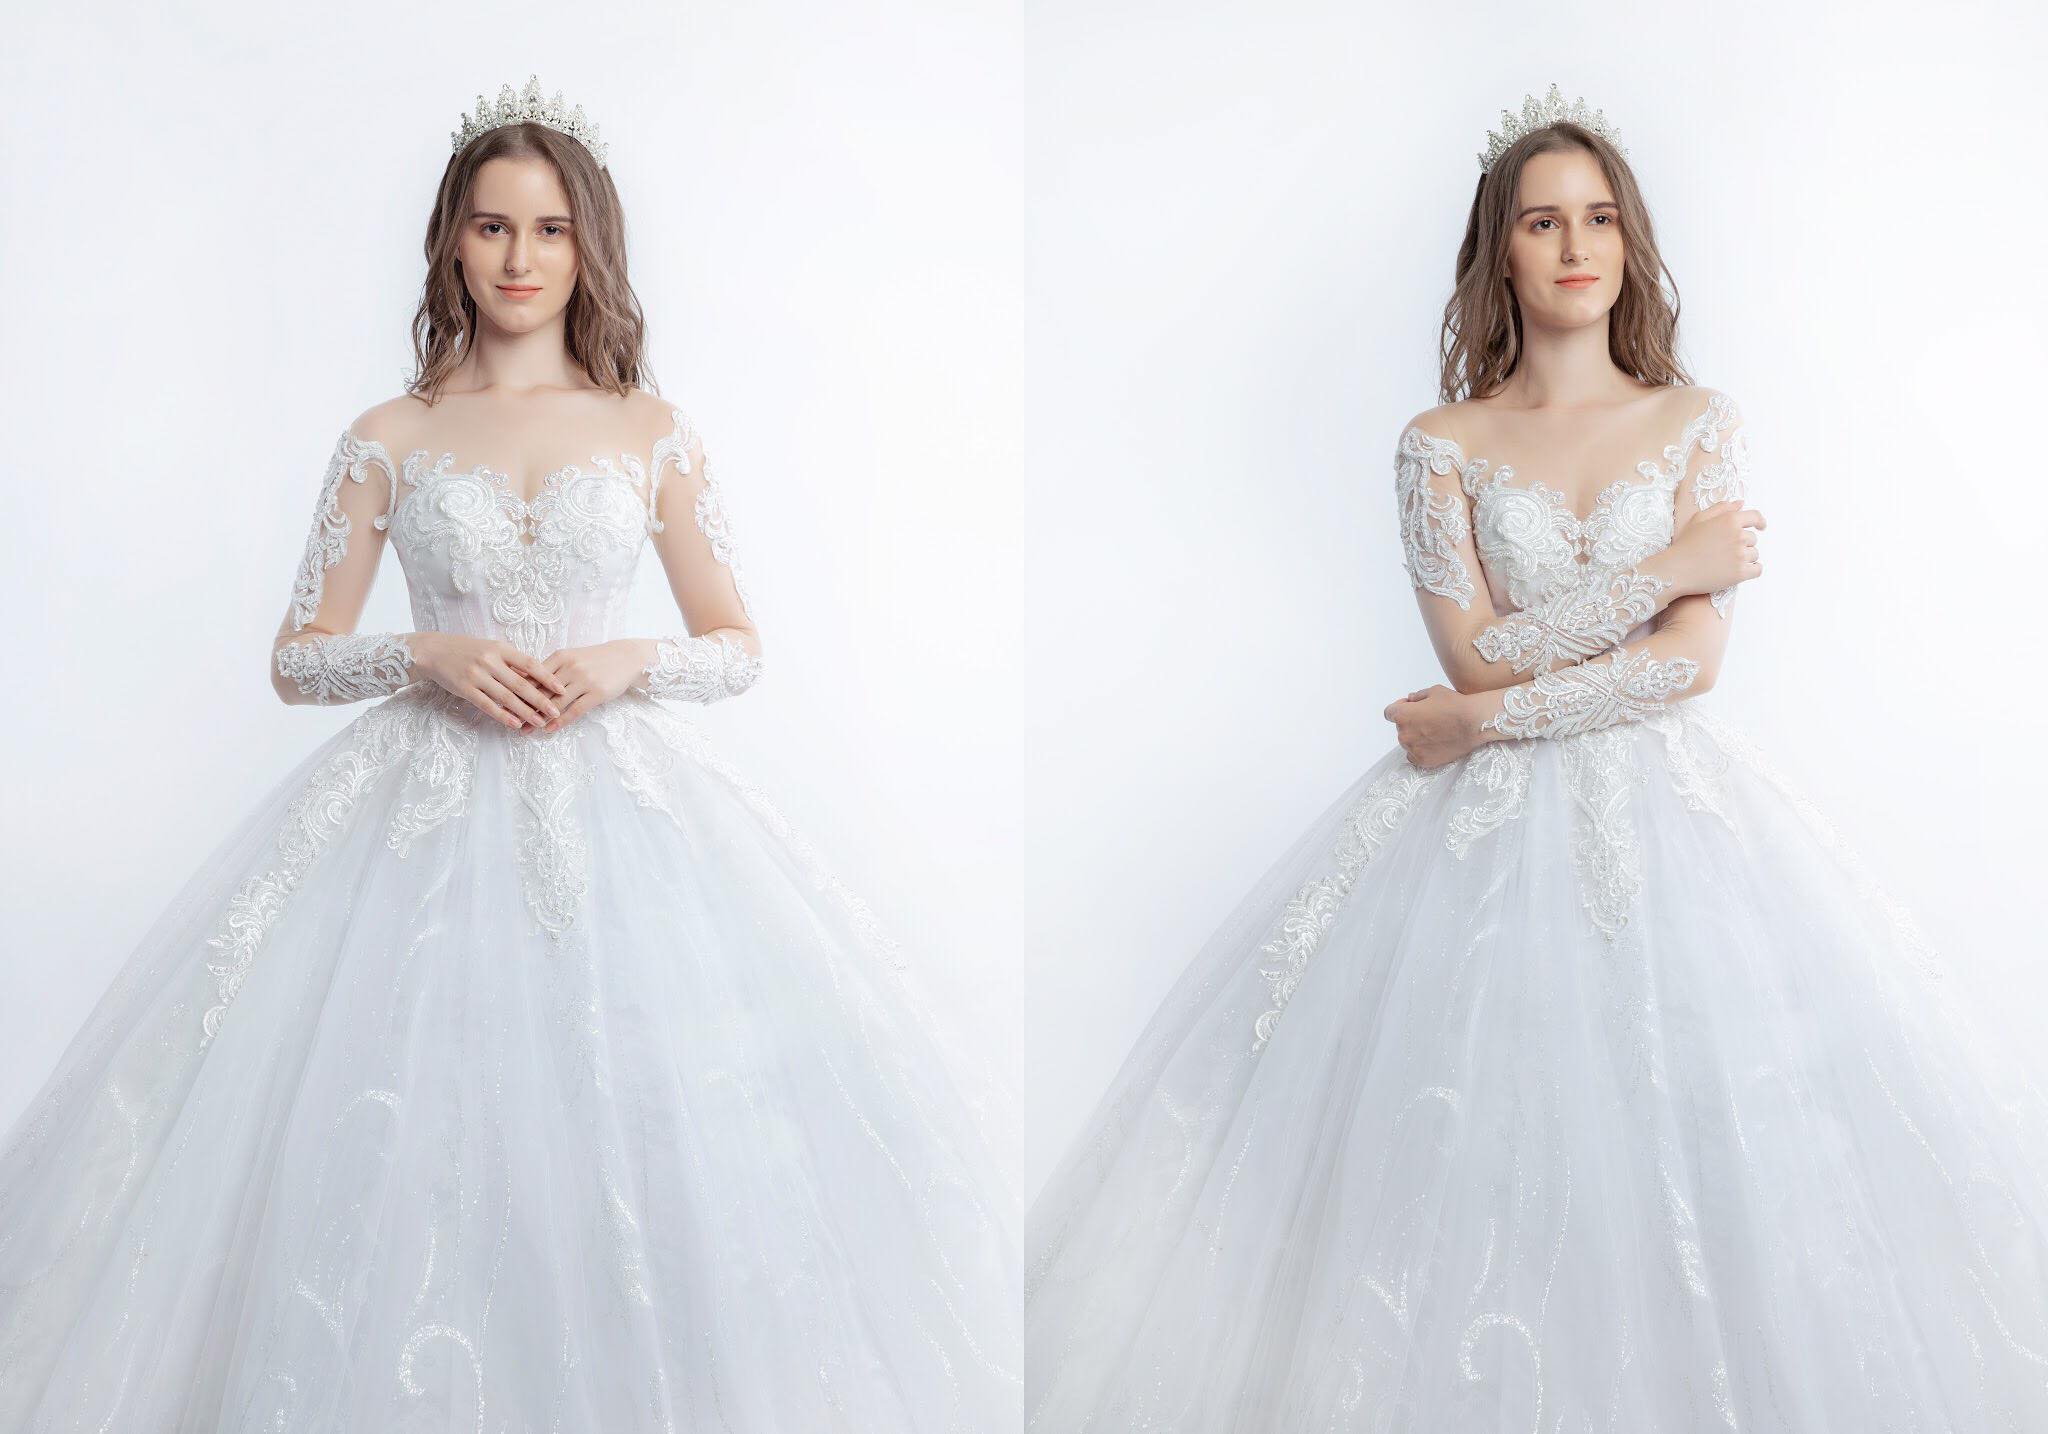 Princess Ball Gown Wedding Dress: Exquisite Corset with High-End Lace Embellishments